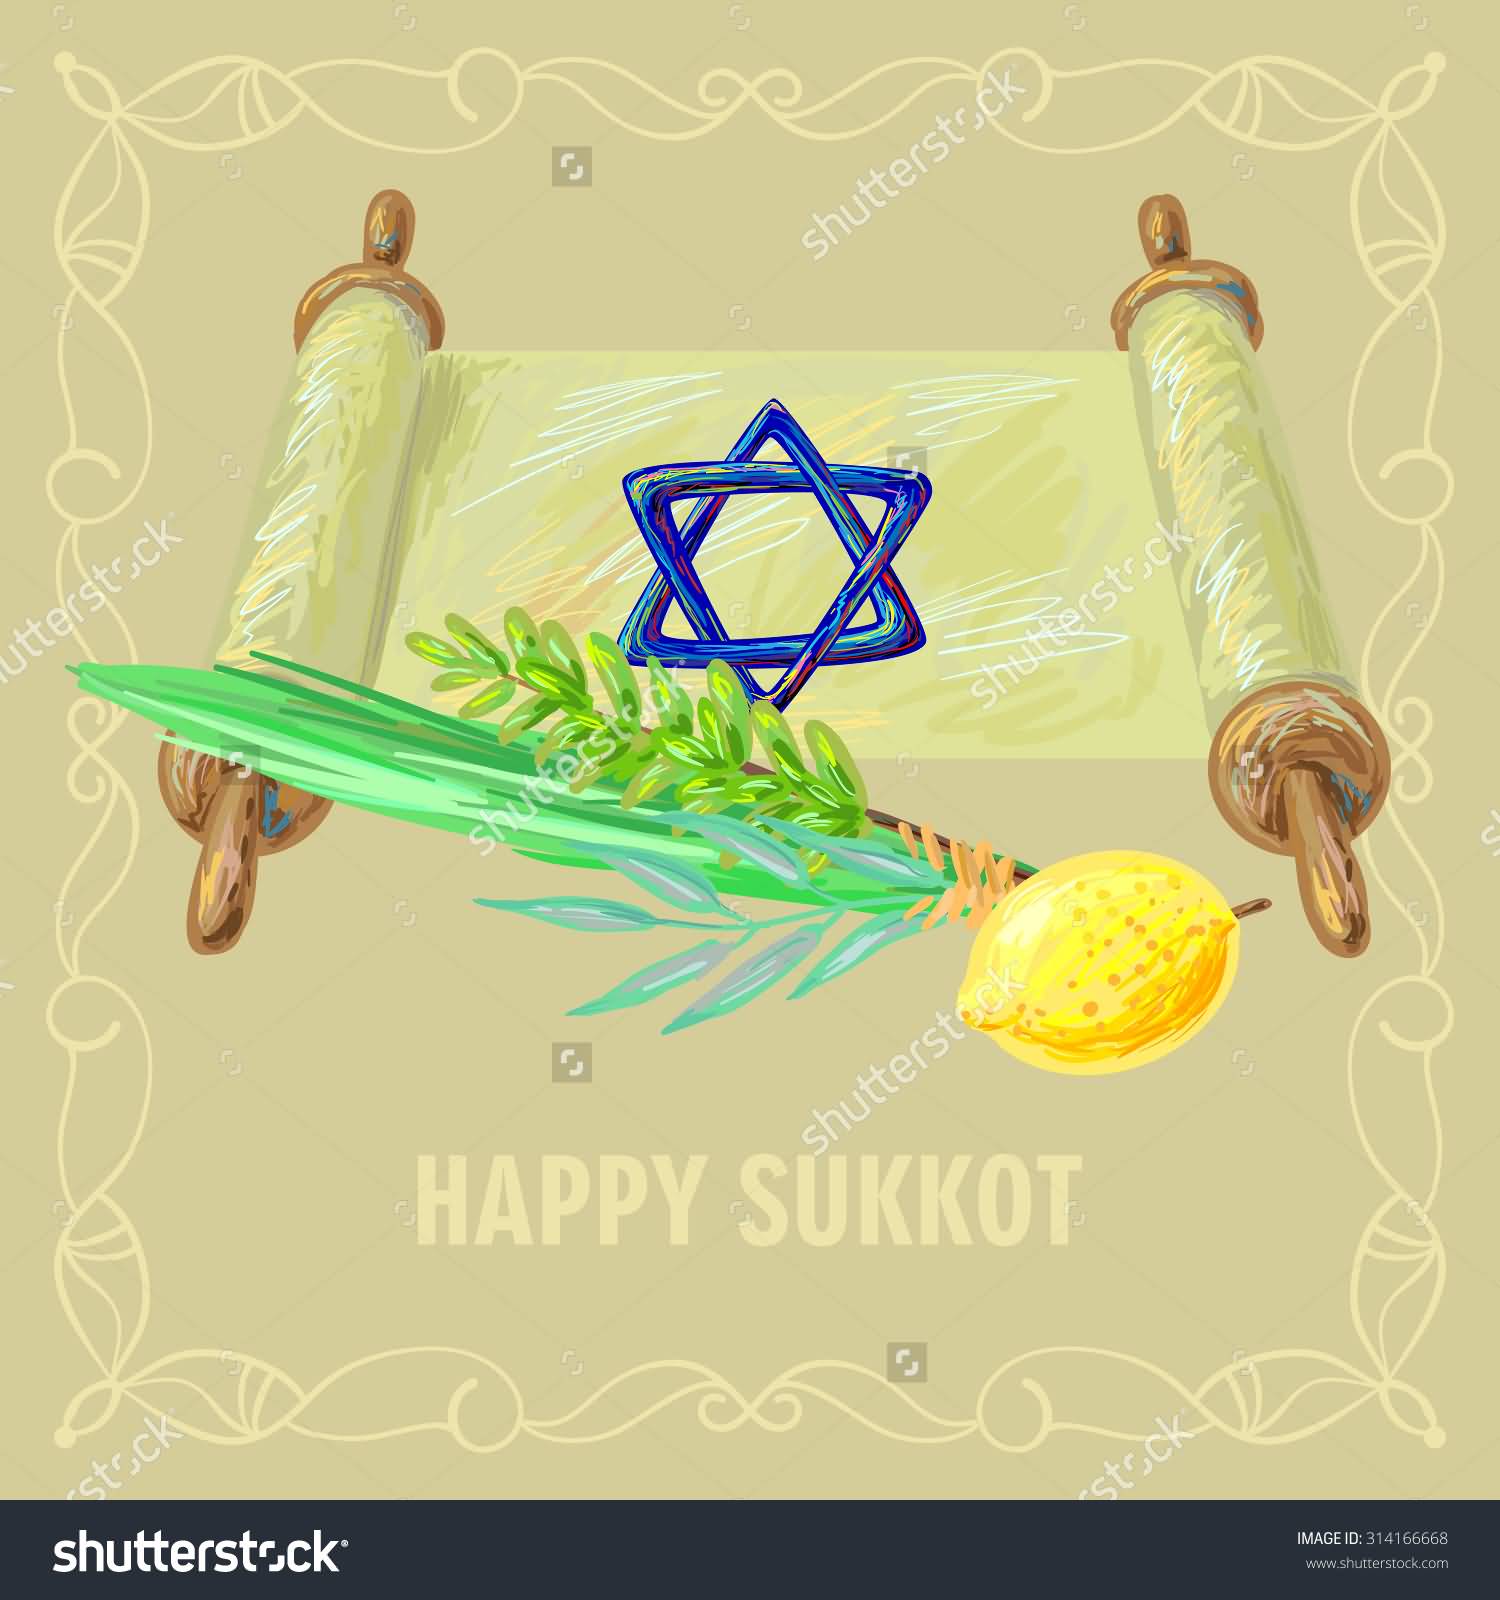 Happy Sukkot Wishes With Four Species And Torah Of Jewish